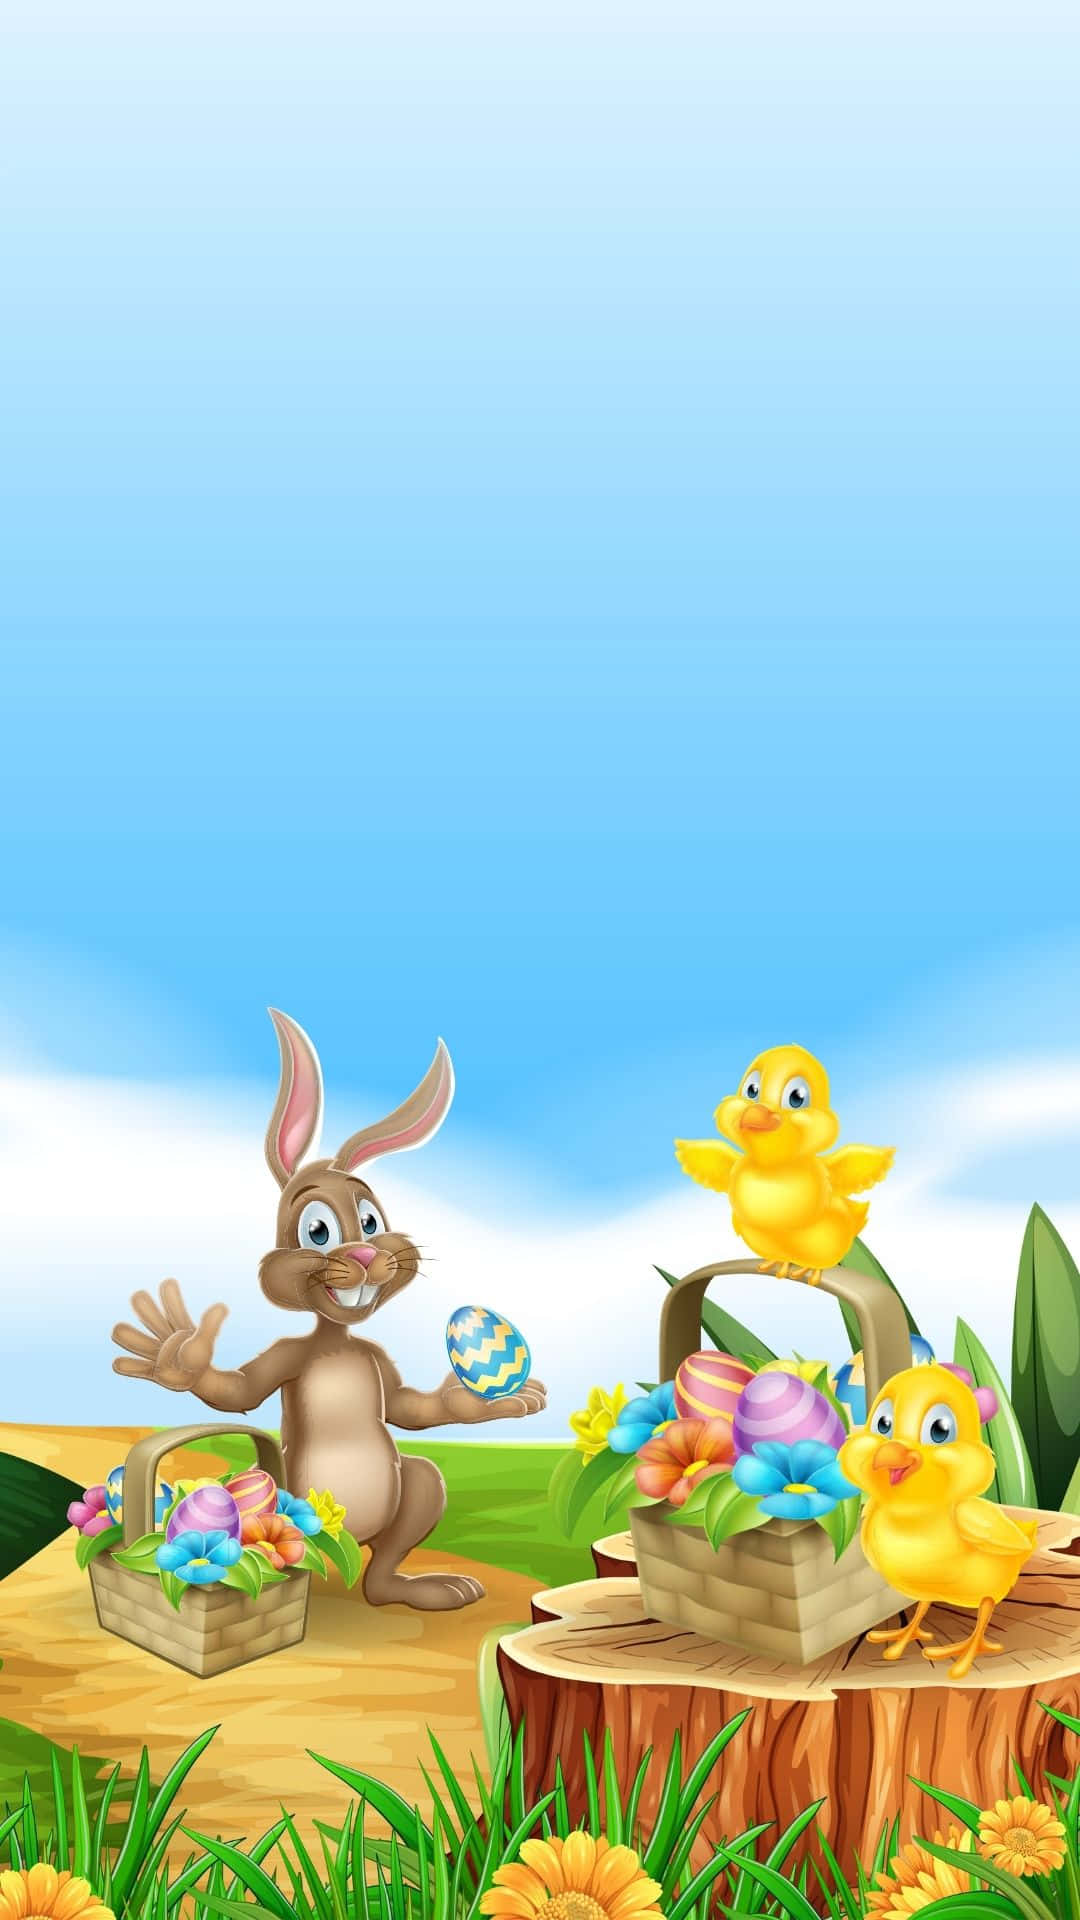 Bunny And Chicks With Easter Egg Basket Background